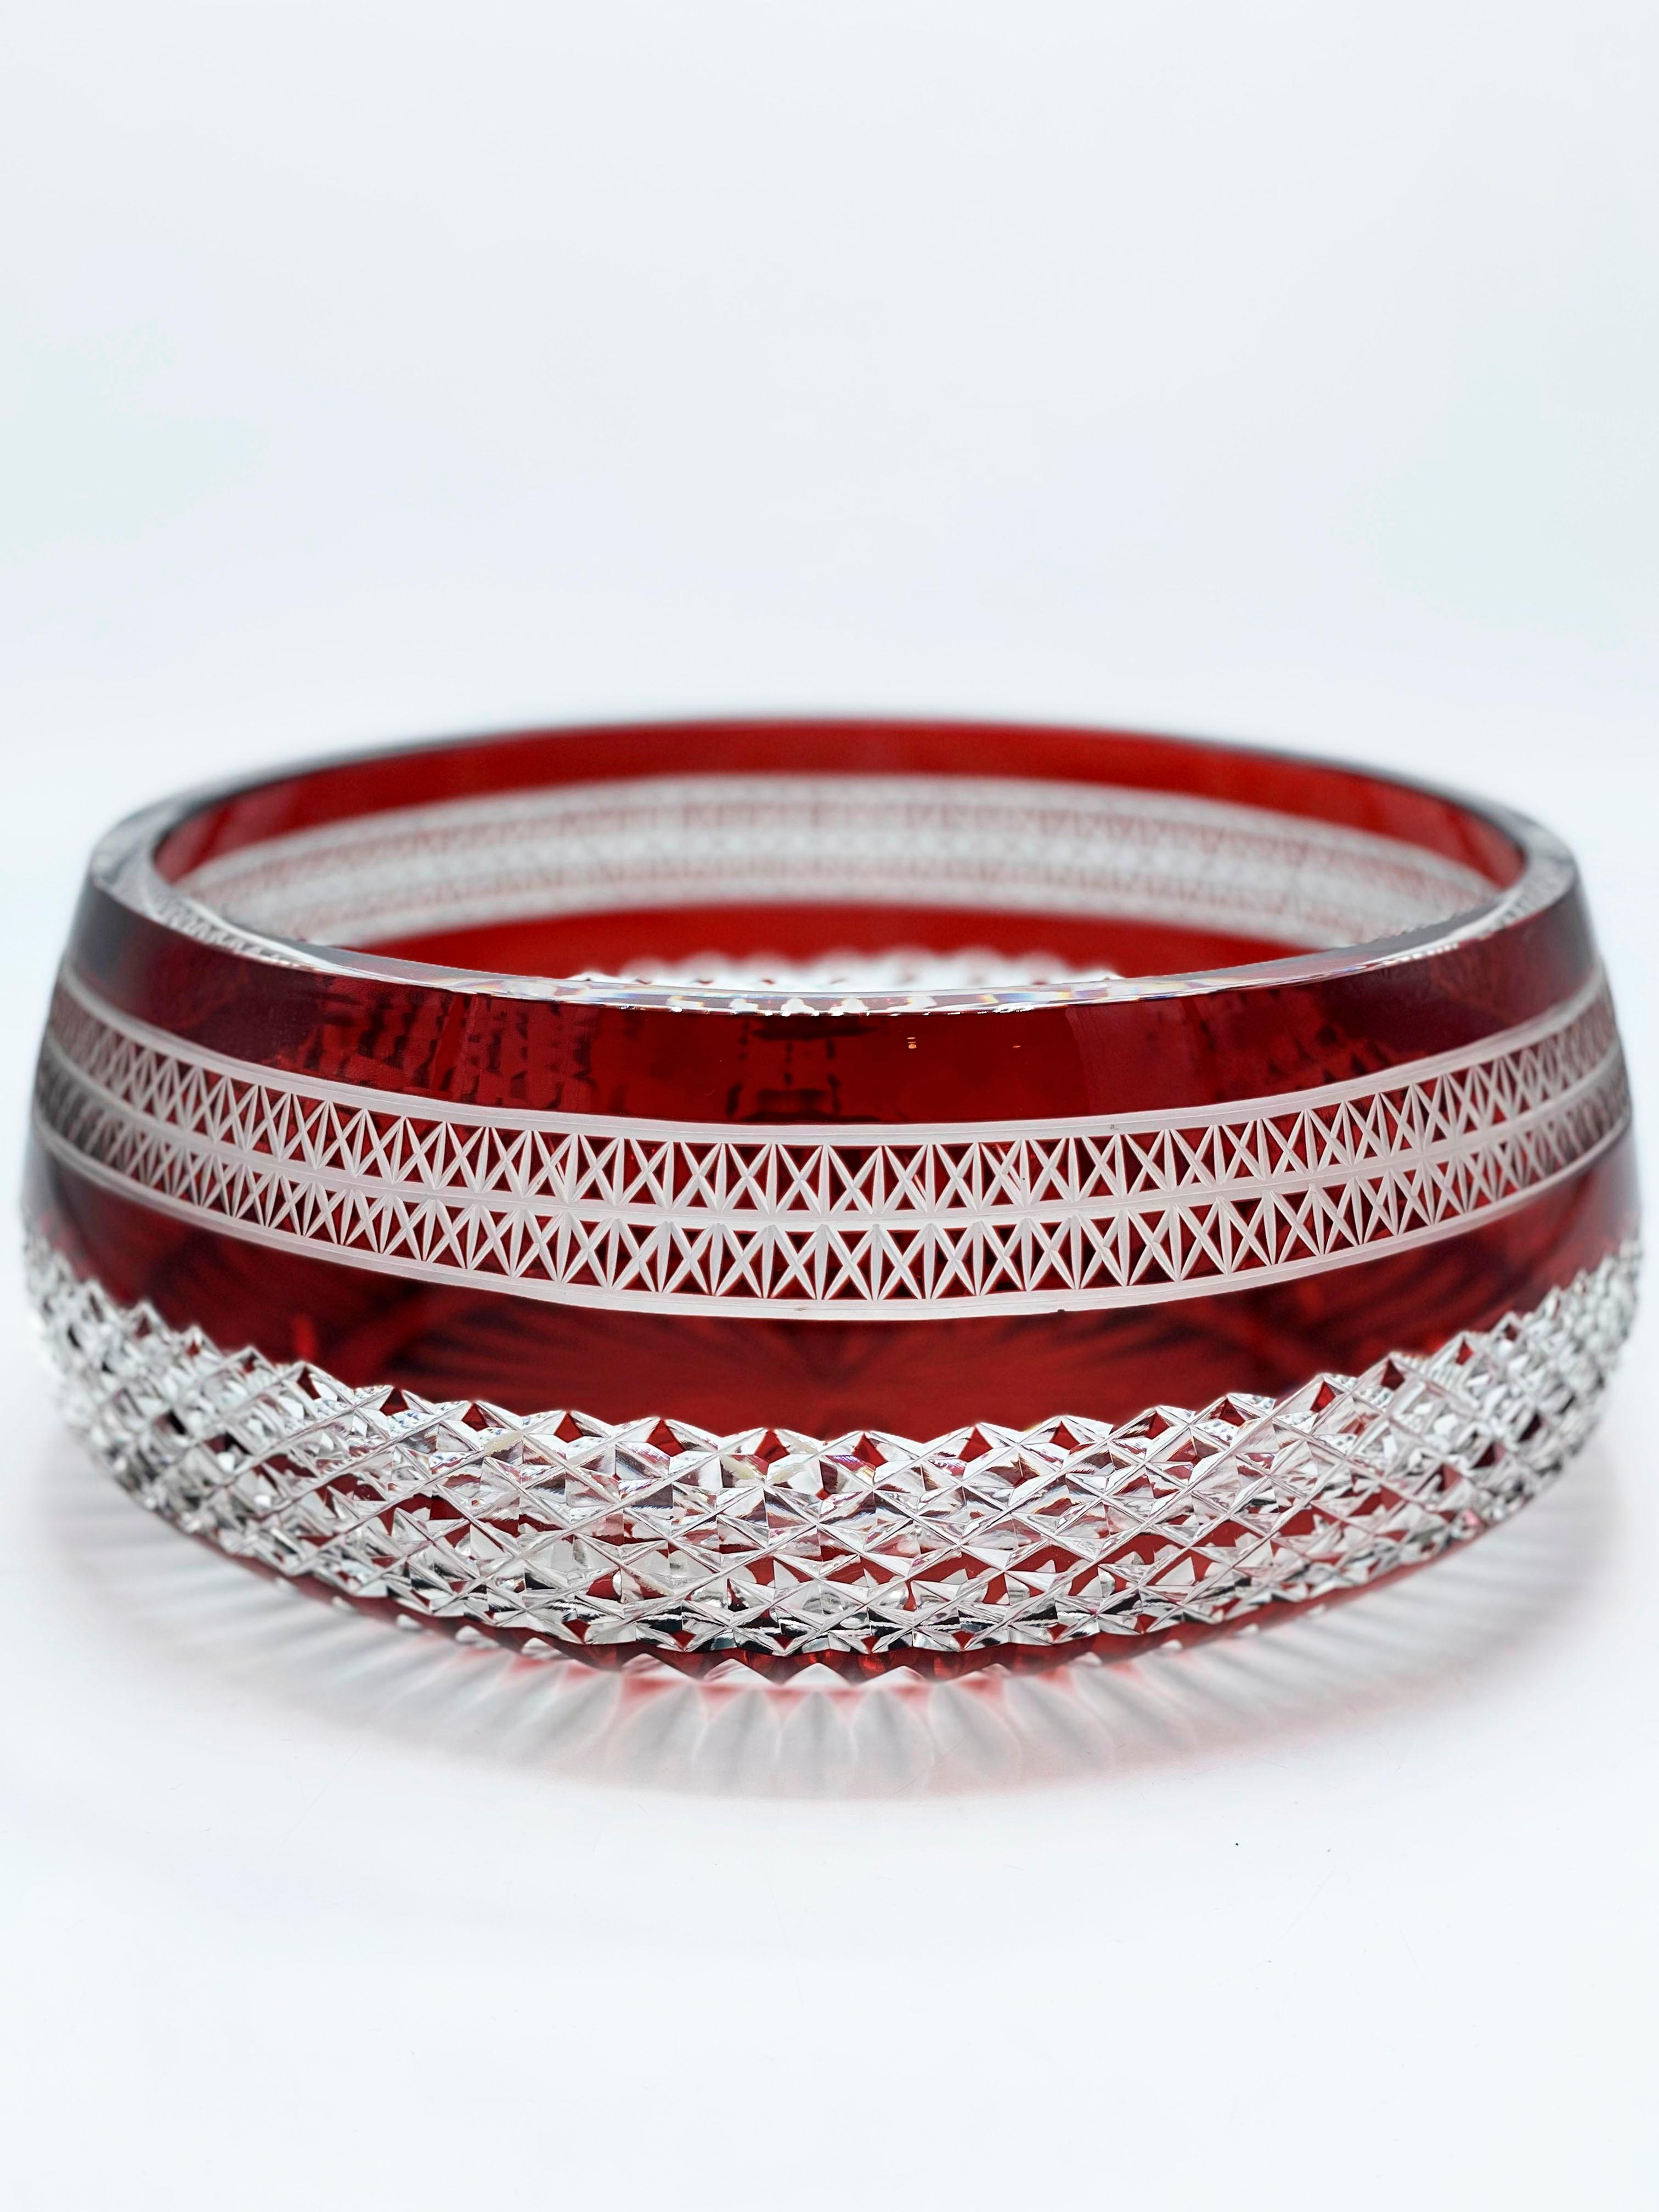 Ruby cut glass carved crystal bowl circa 1960s 
Blow ruby cut glass with beautifull carved details in geometric patterns perfect as a centerpiece, fruit bowl or planter.
Excellent conditions! without retorations and imperfections!